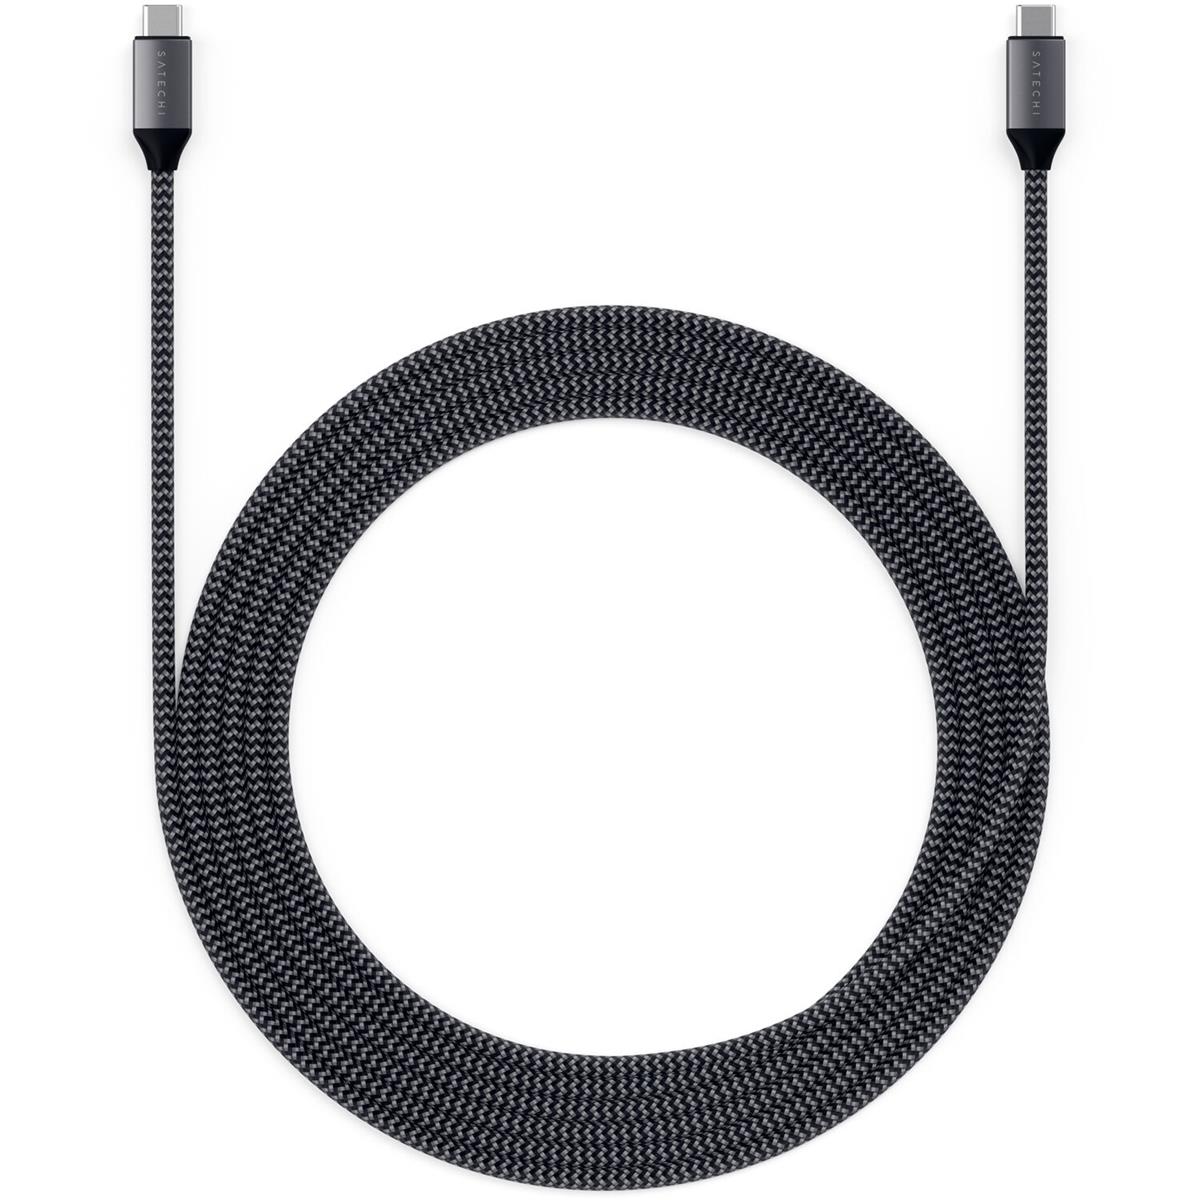 Image of Satechi 6.5' USB Type-C to Type-C Charging Cable